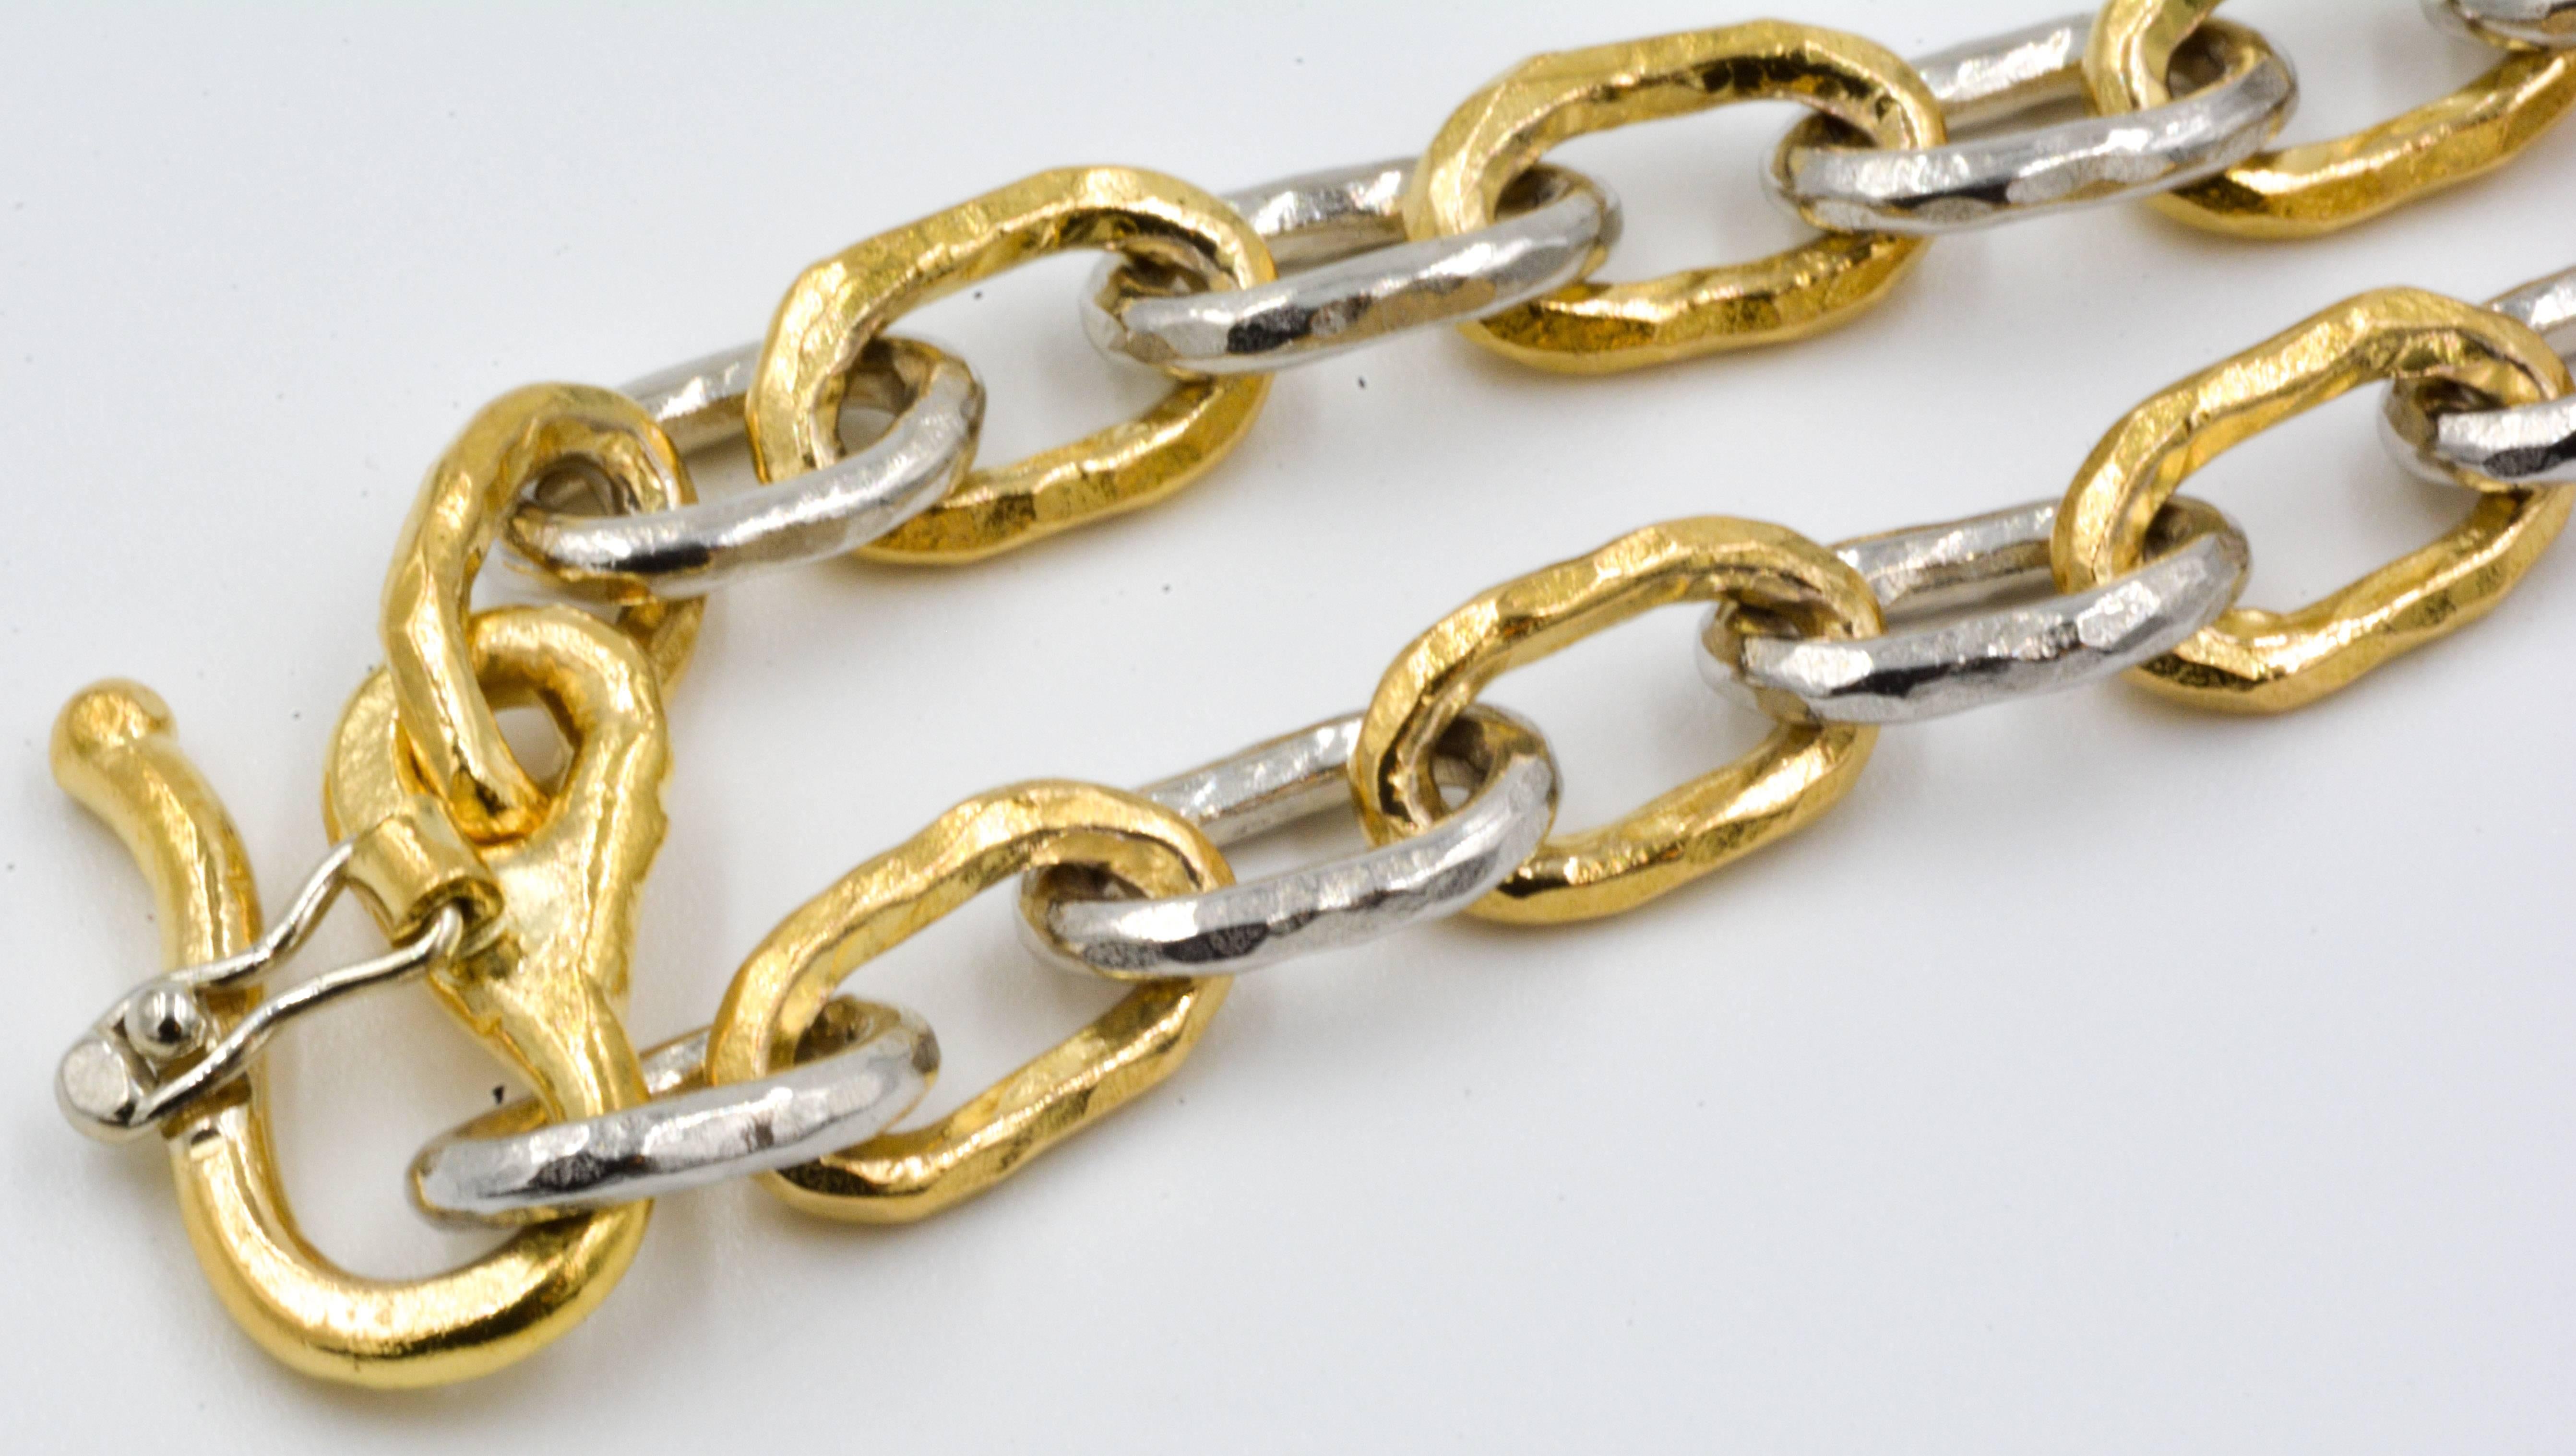 This lovely Jean Mahie bracelet features classic 22kt yellow gold and shimmering platinum. The links are crafted in the signature primitive hammered finish that has made Jean Mahie famous. The gold and platinum contrast beautifully, making this